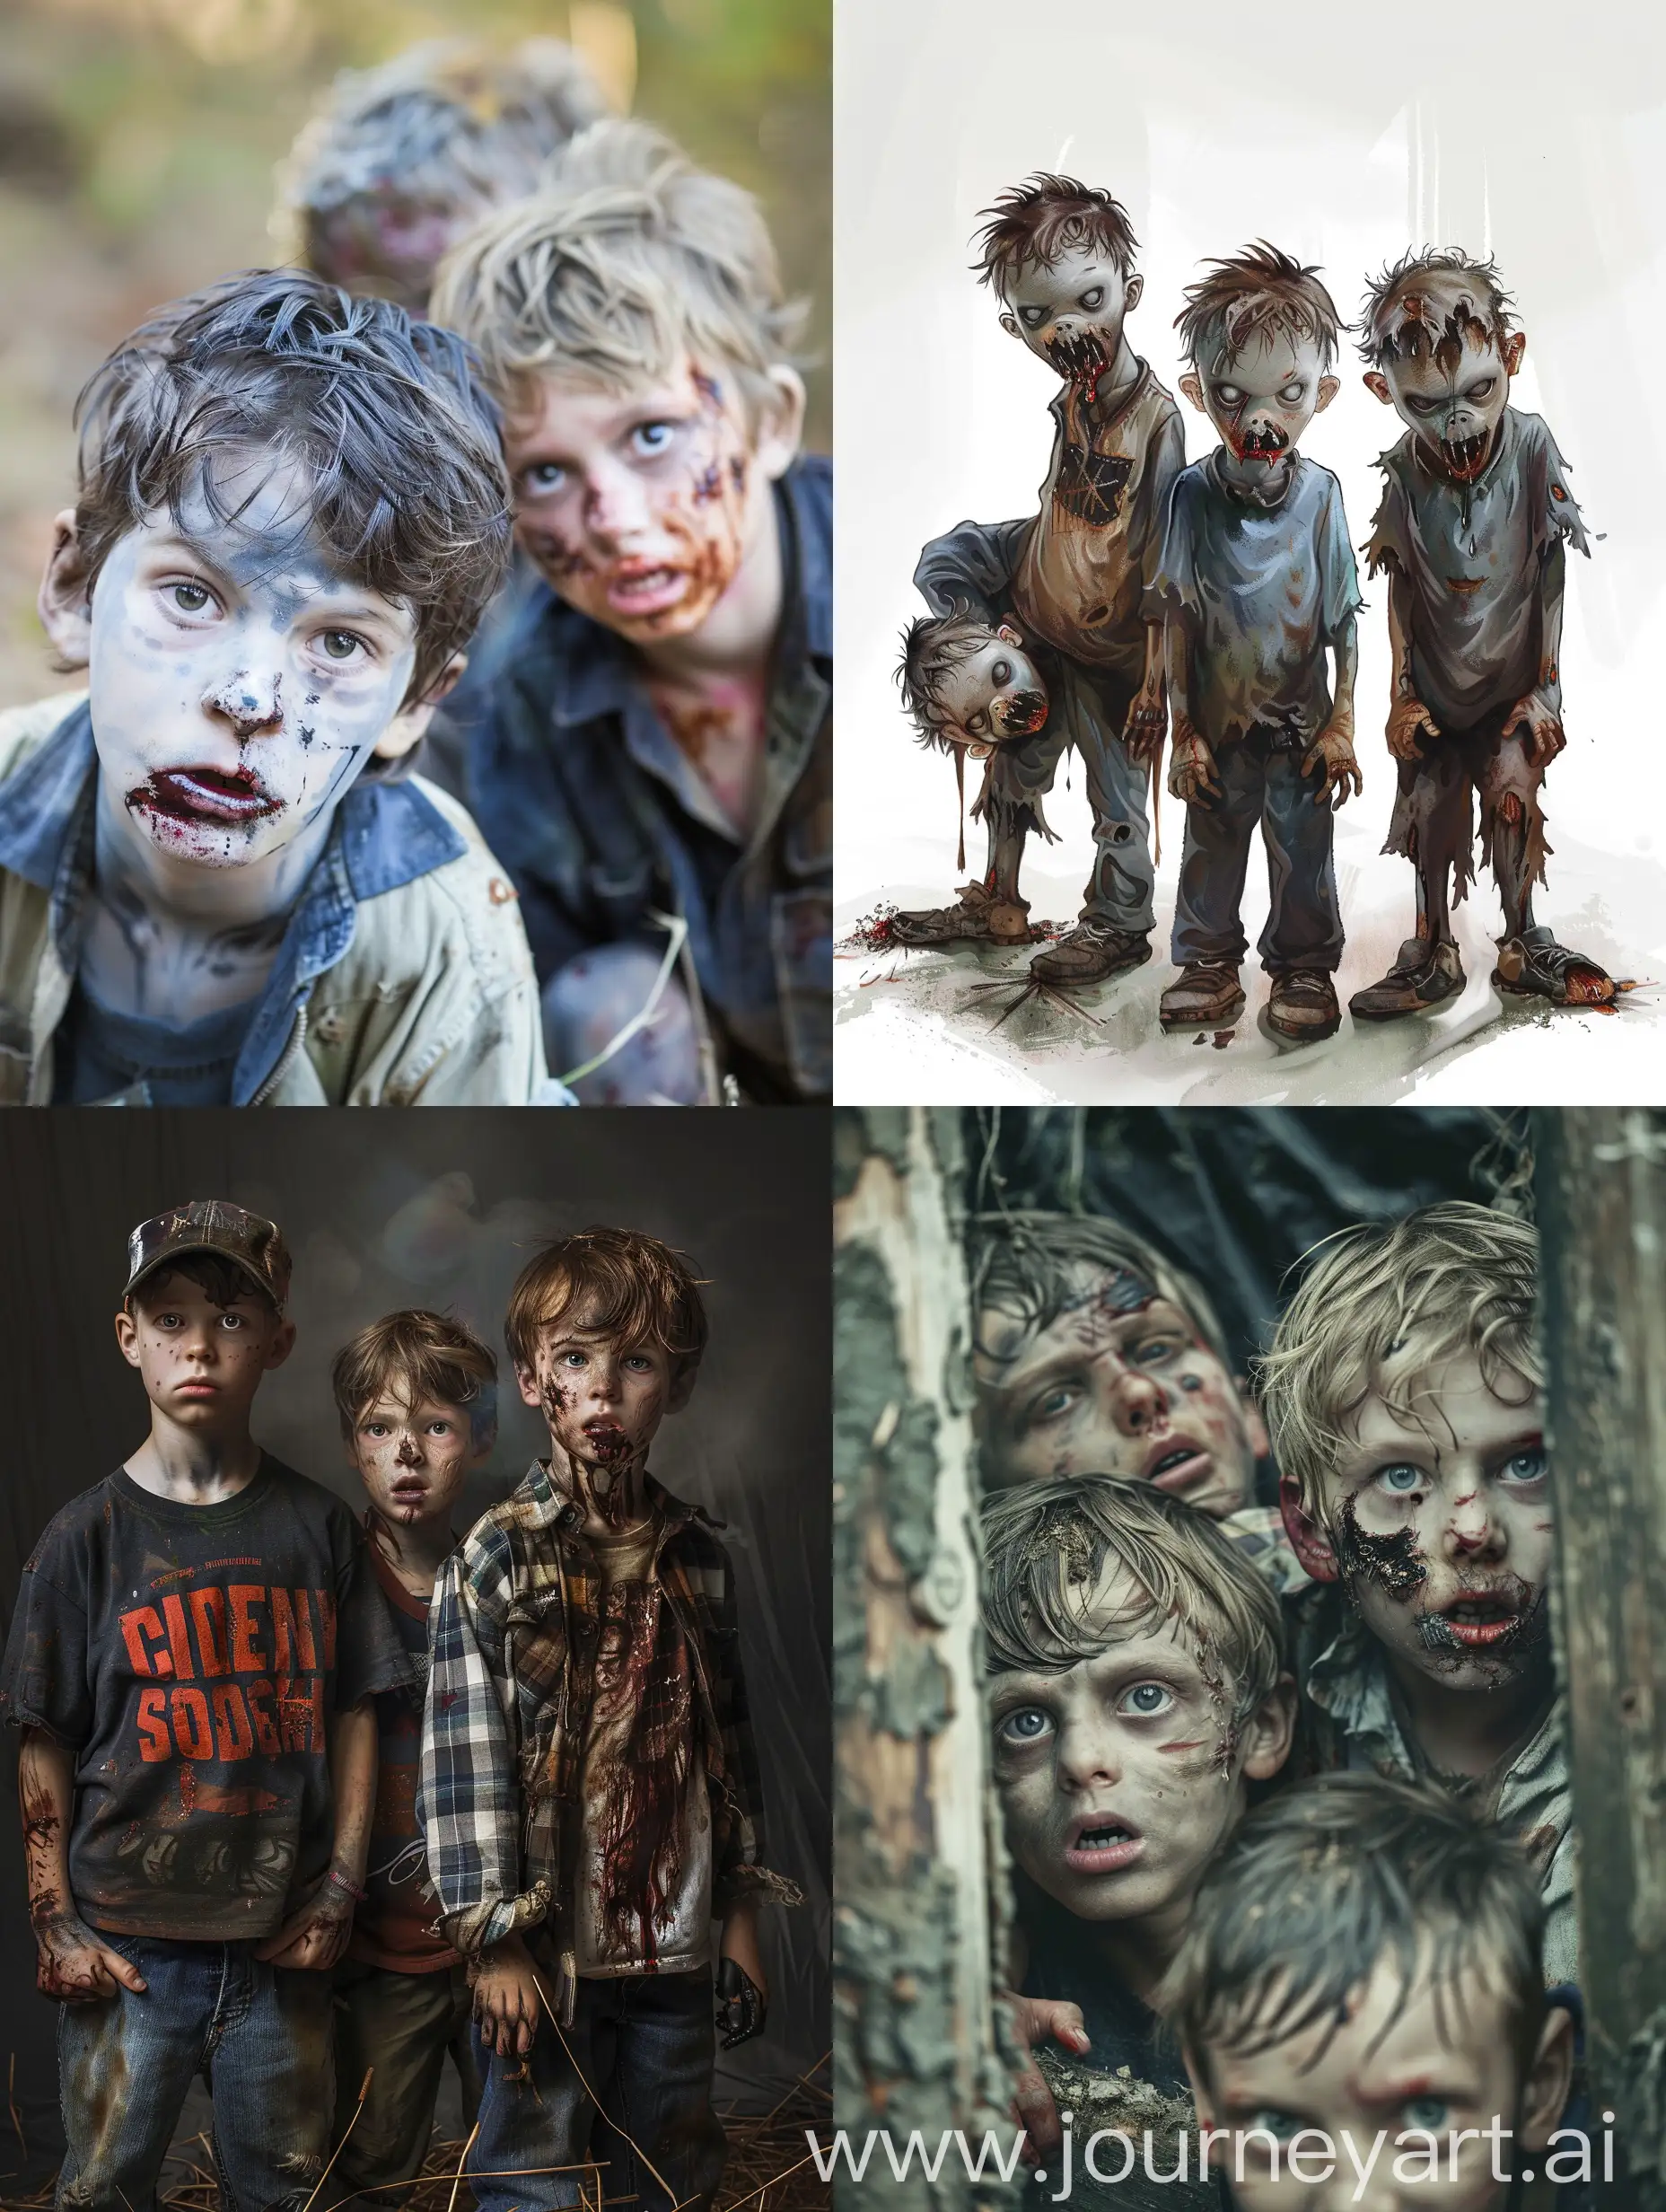 Playful-Little-Boys-in-Zombie-Costumes